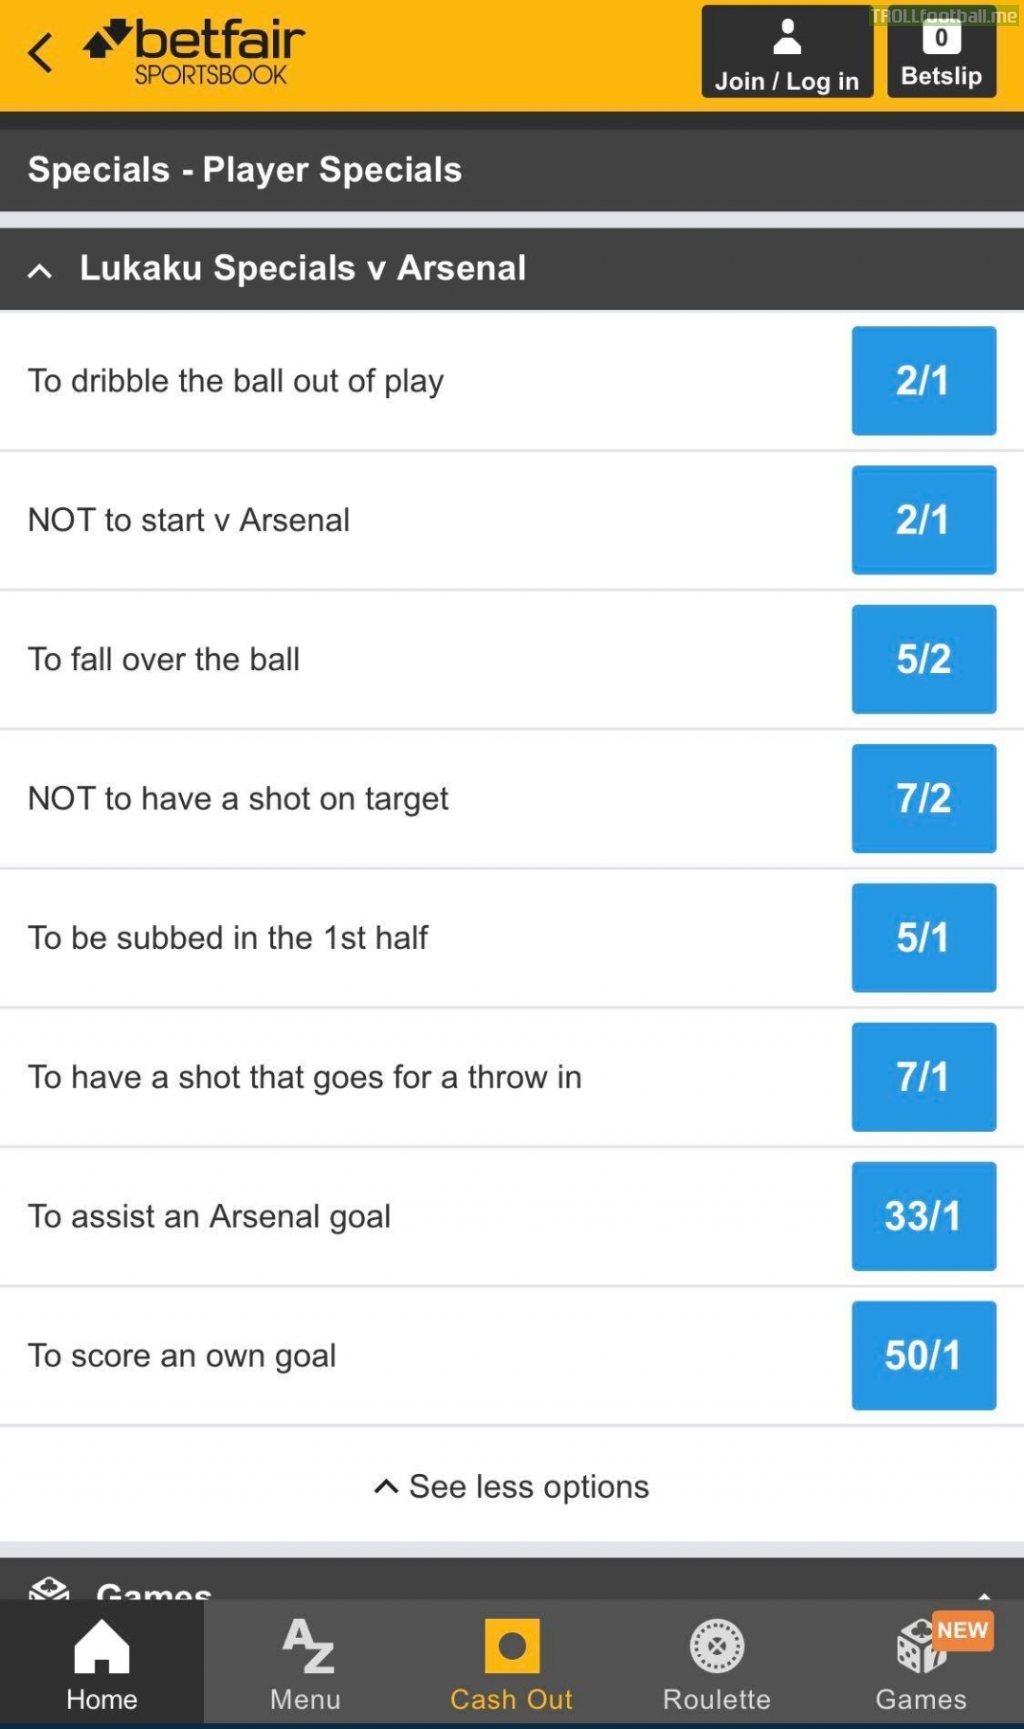 Betfair are offering a set of 'Lukaku Specials' for tomorrow's match against Arsenal.